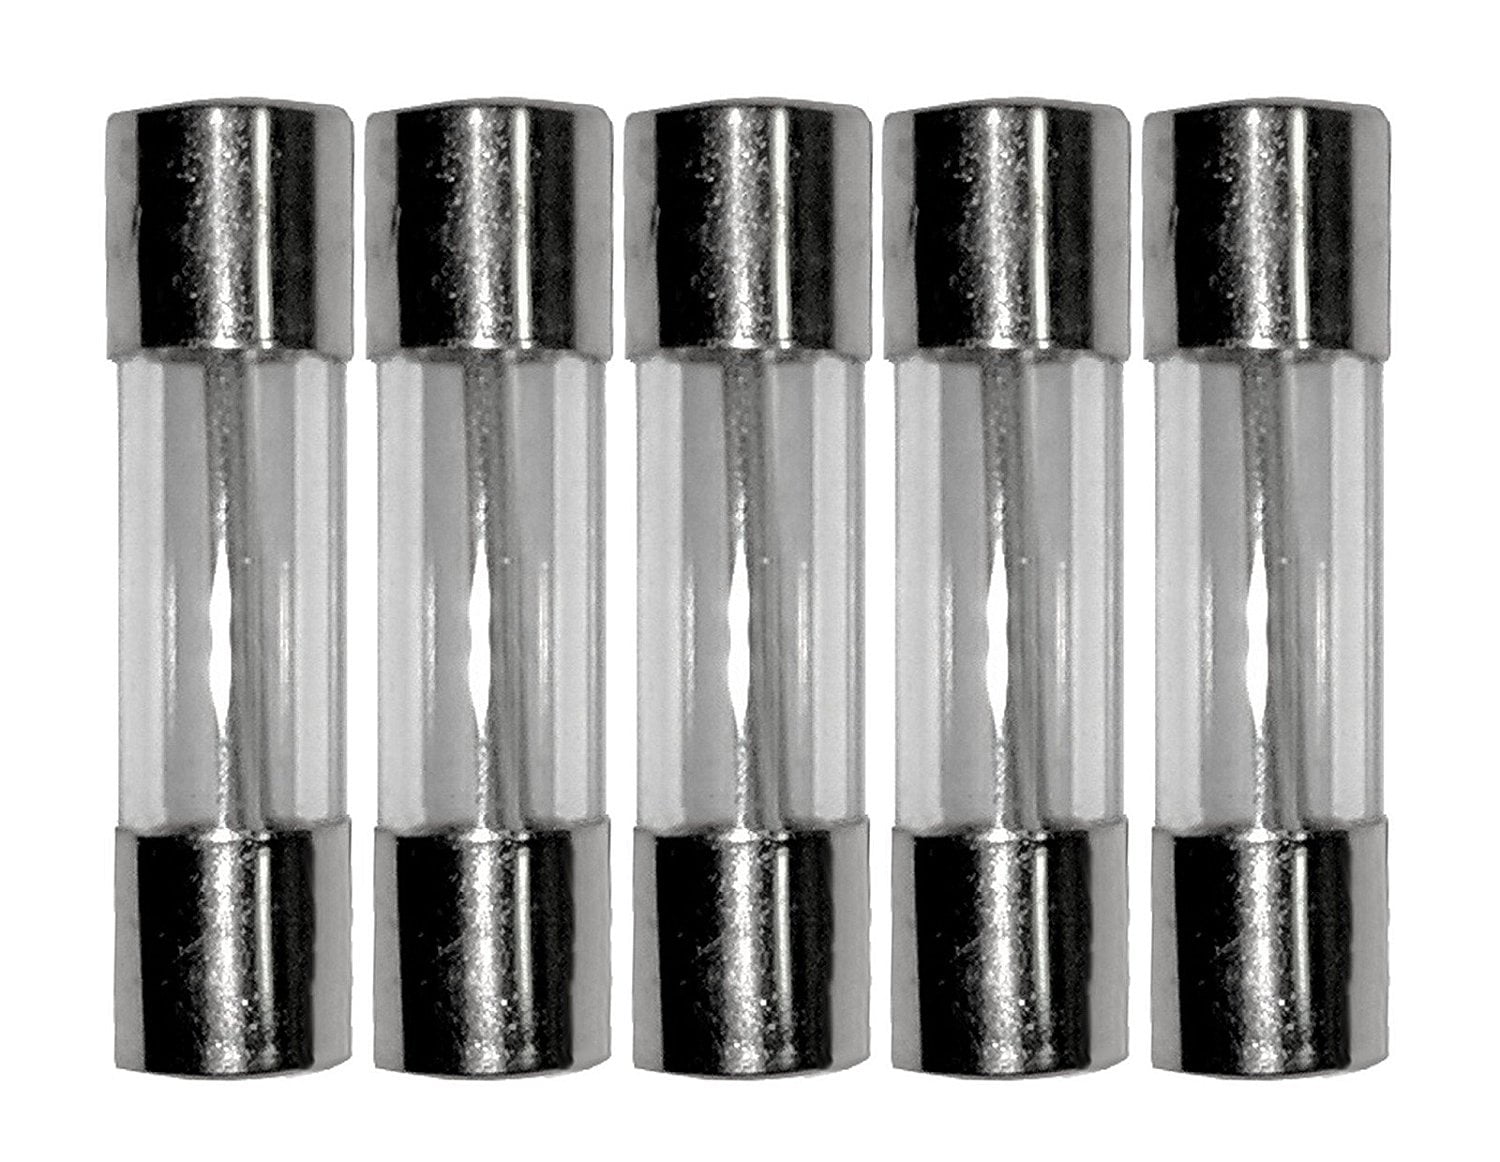 Innovo Glass Fuses Classic Car Fuses 10AMP Pack of 50 Quick Blow Fuses